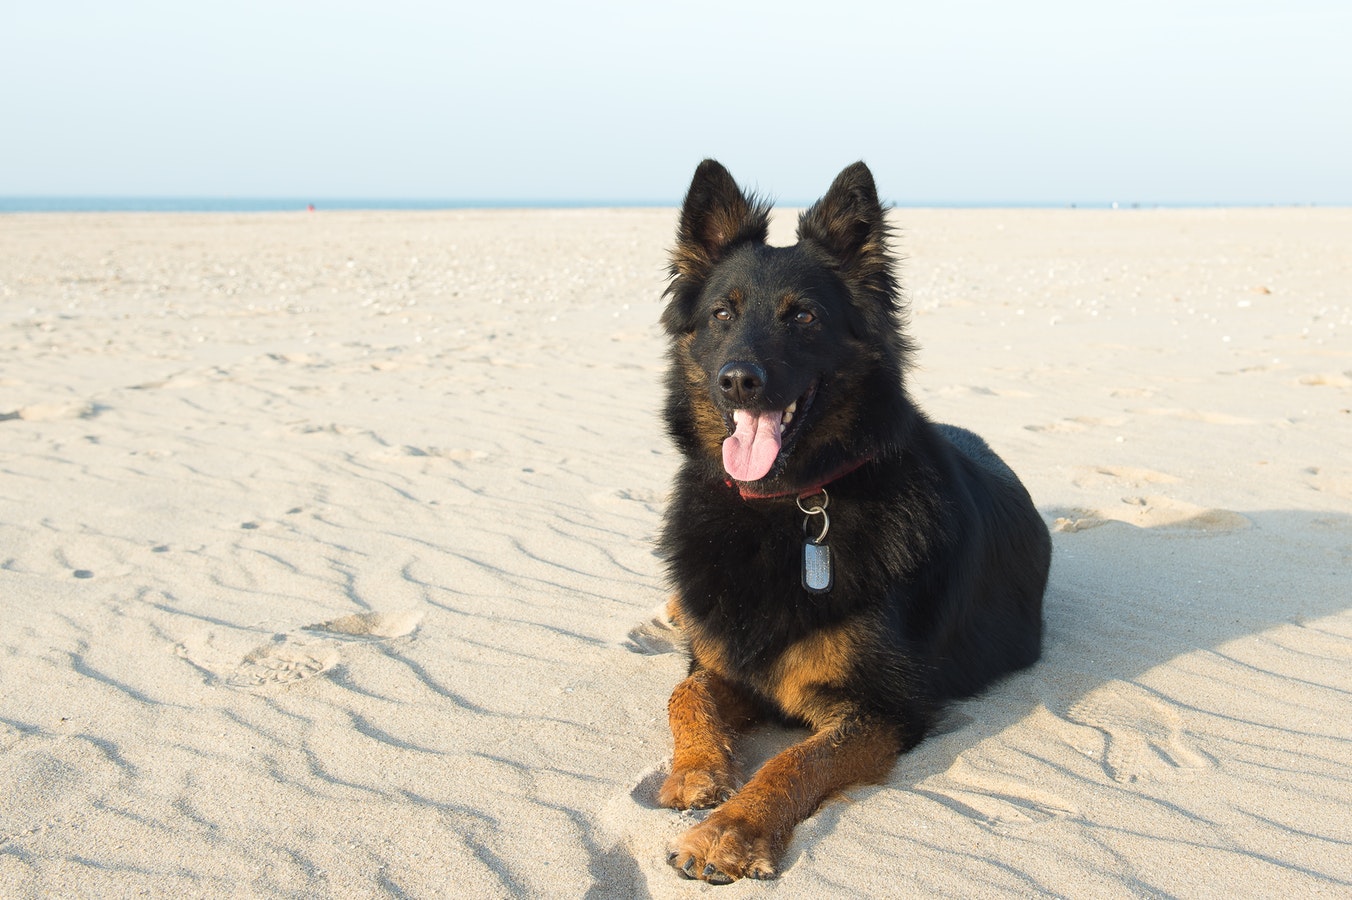 What Do You Do with Your Dog When You Go on Vacation? |